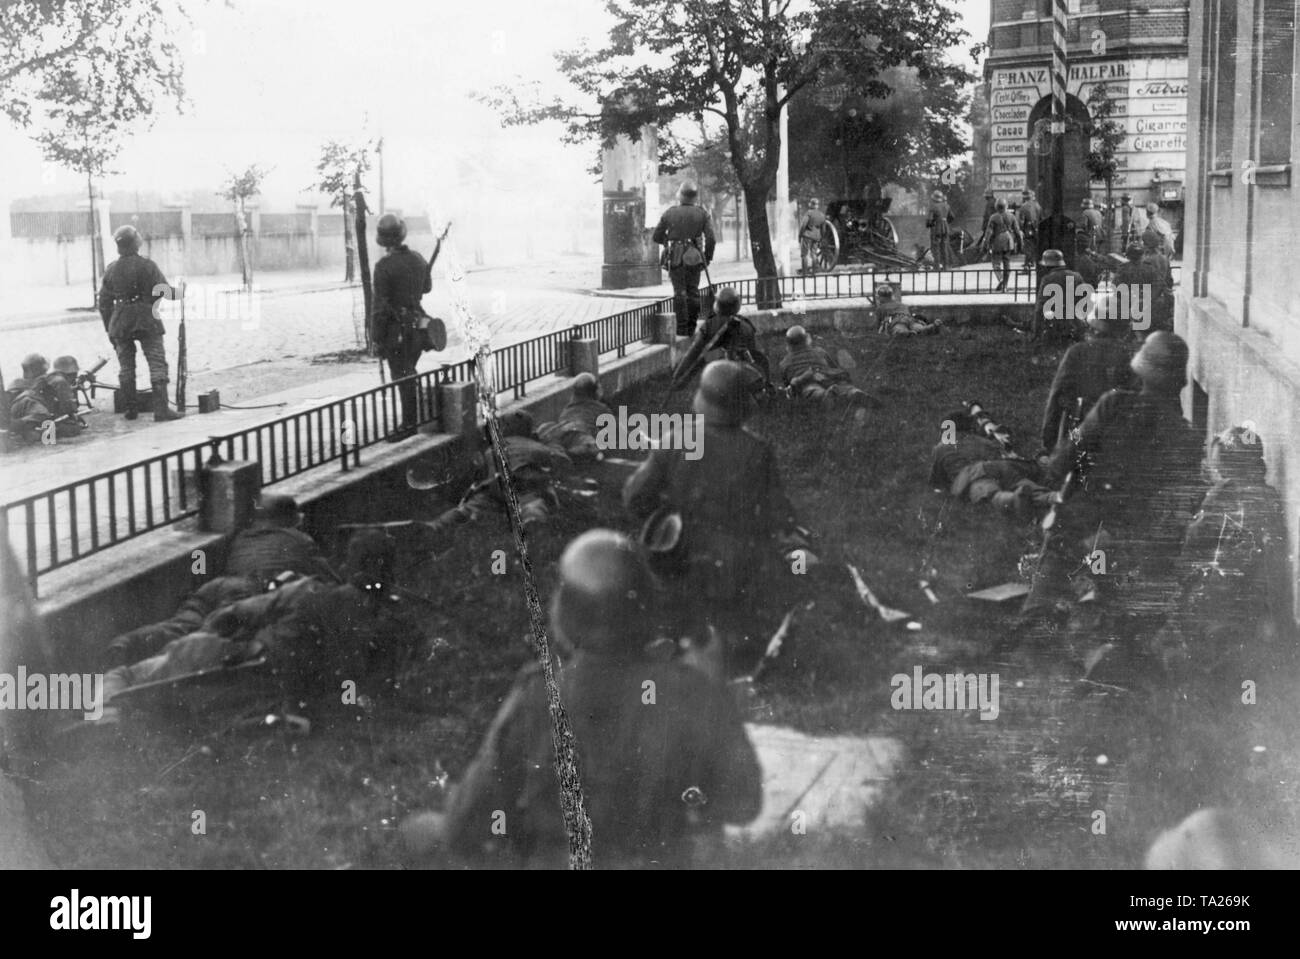 In August 1919 the so-called Black Reichswehr, an association of several Freikorps units, defeated the first Polish uprising in Upper Silesia. Here Freikorp units fight around the station in Myslowitz. Stock Photo